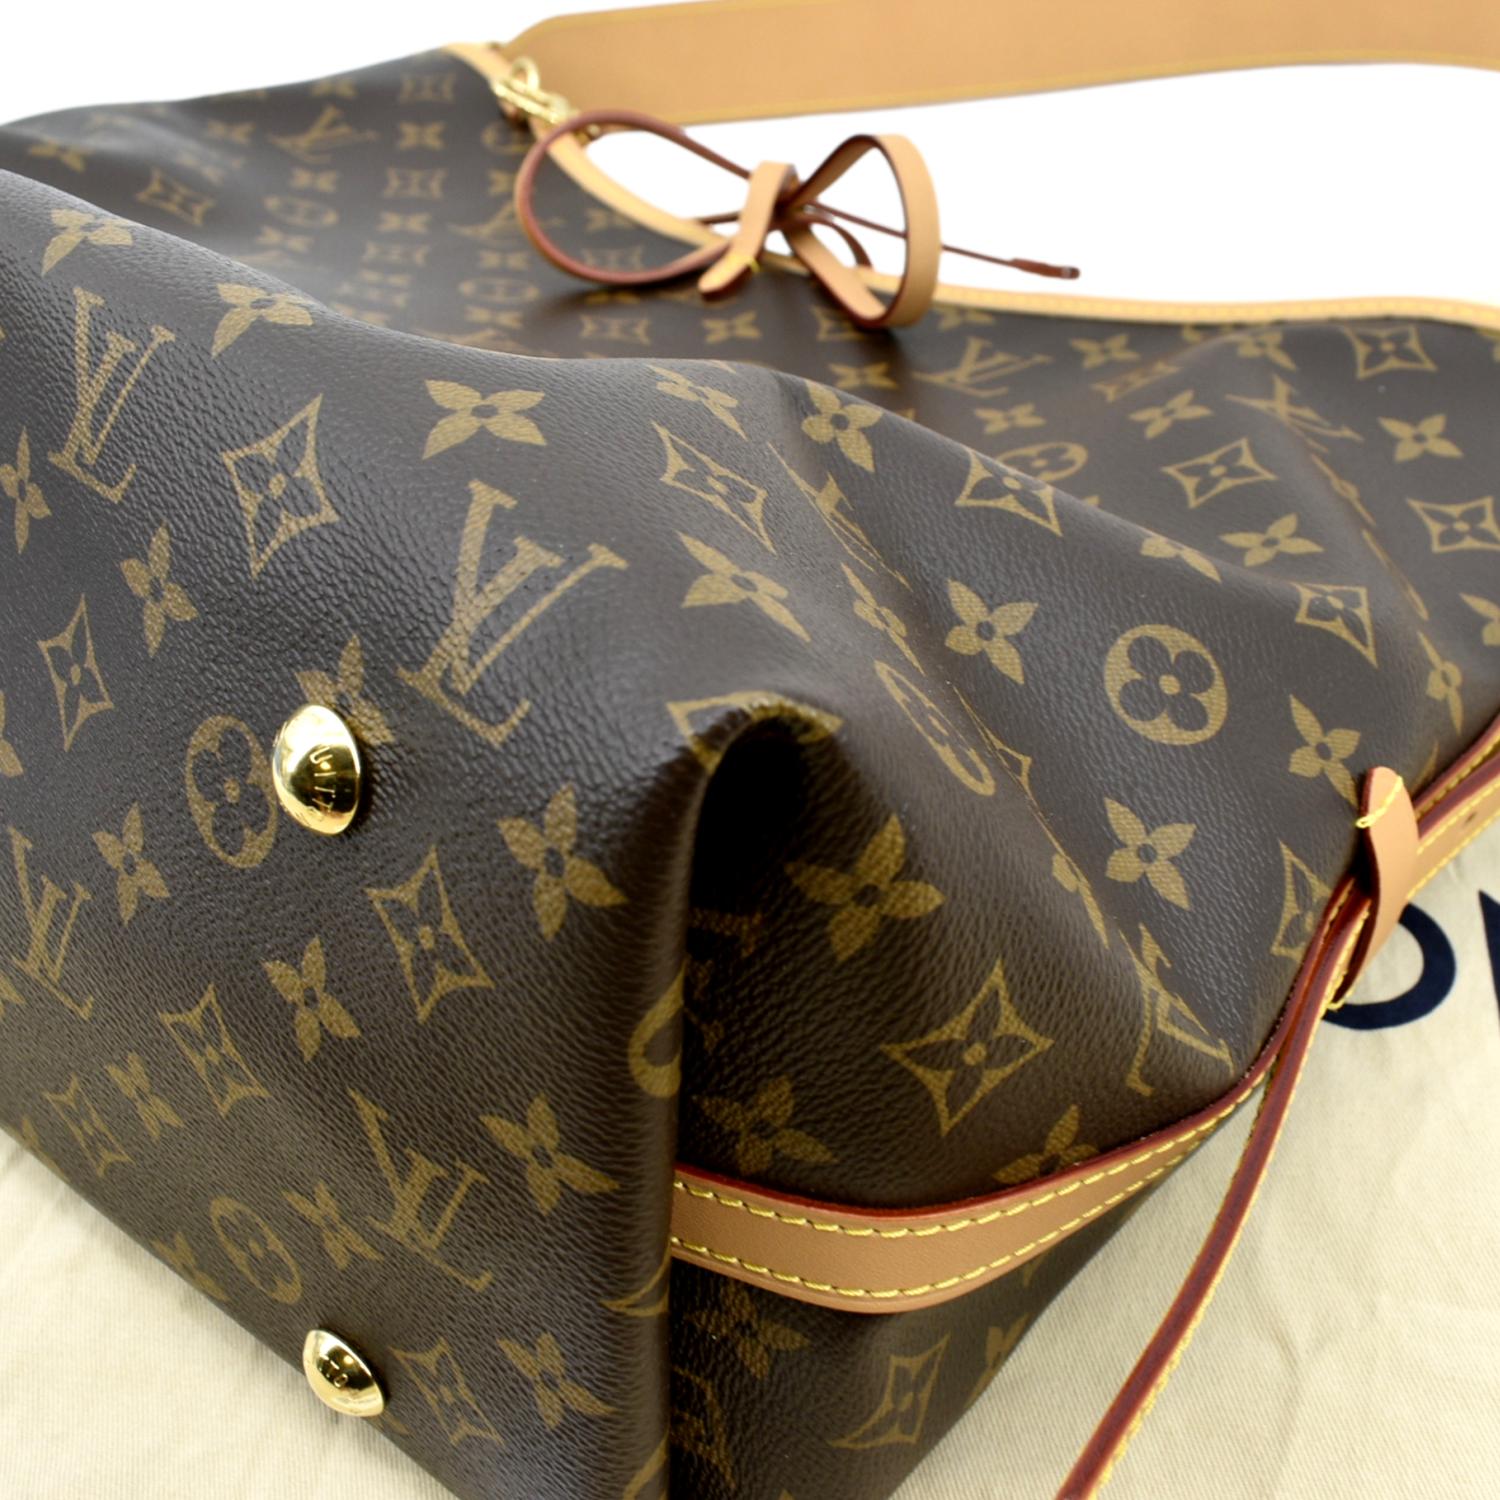 Louis Vuitton Carryall weekend bag in brown monogram canvas and natural  leather